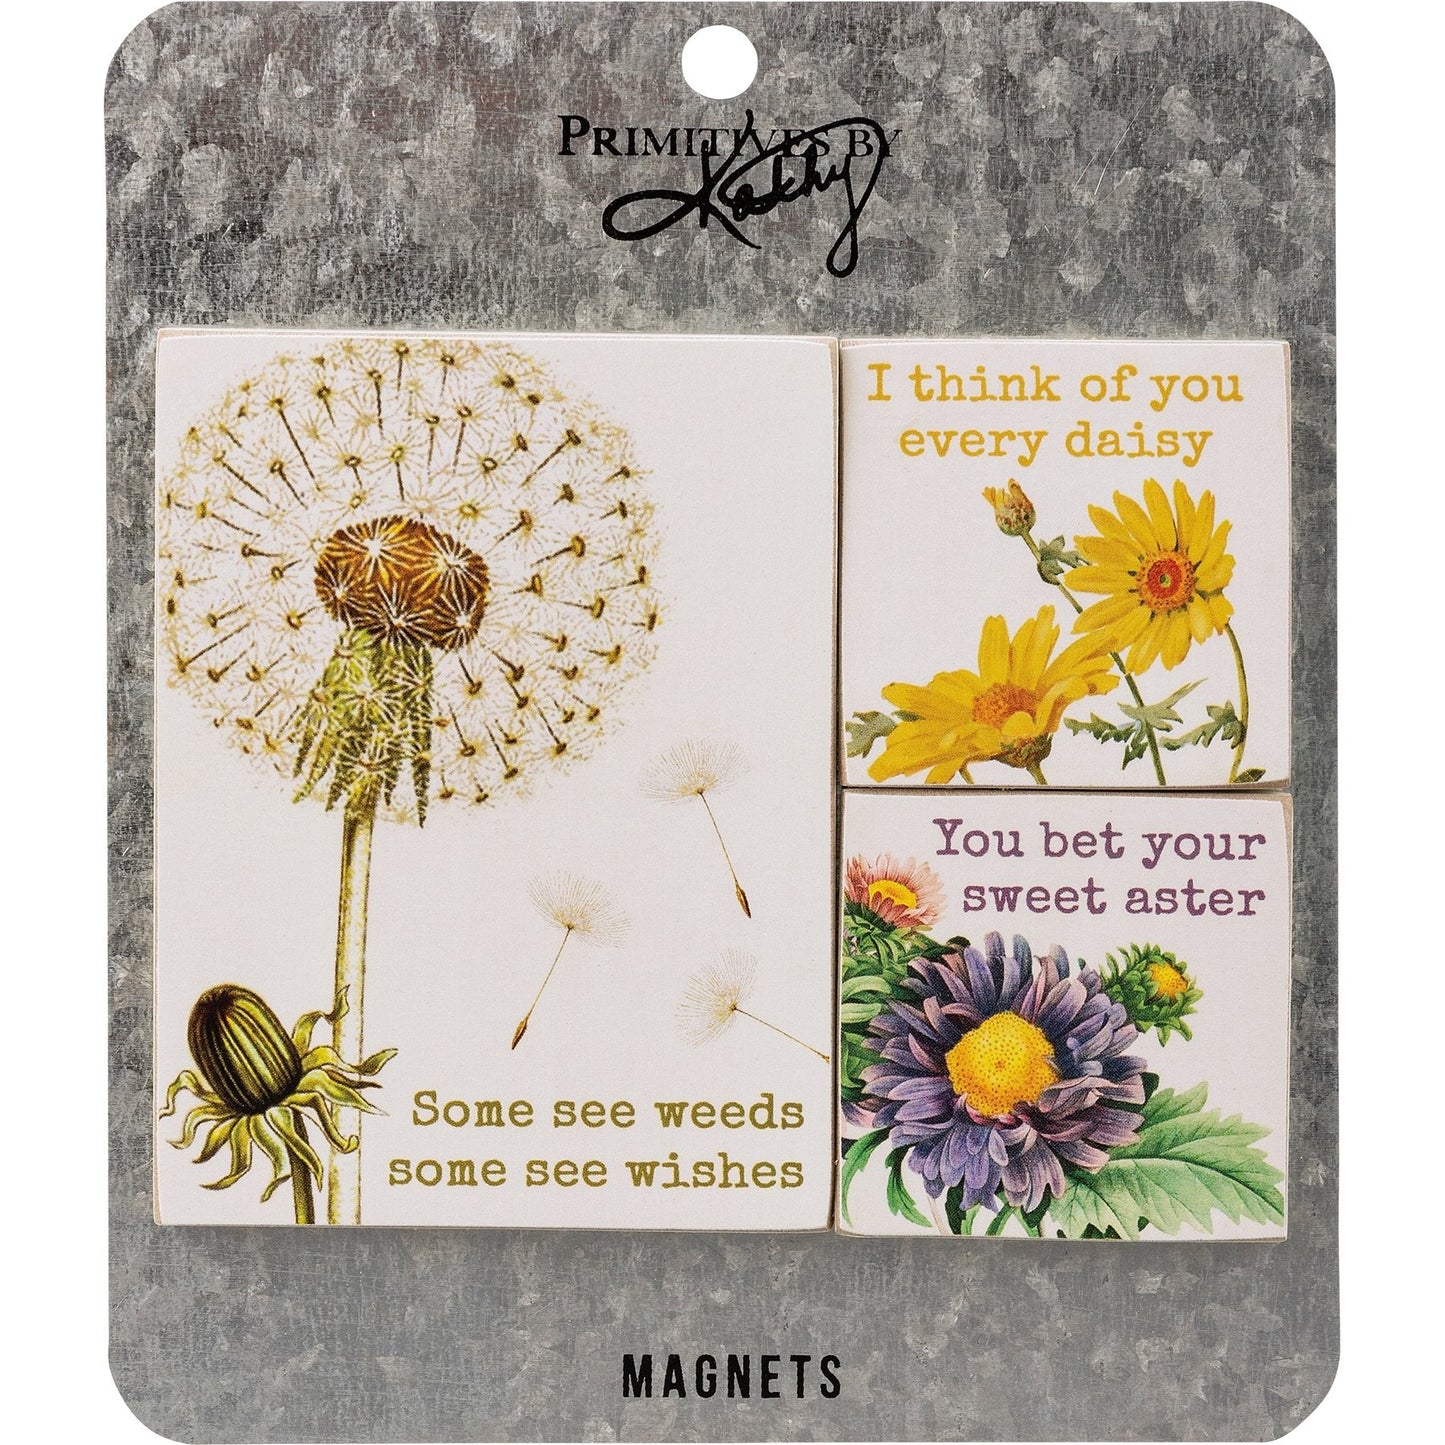 I Think of You Every Daisy Magnet Set | 3 Magnets on a Metal Gift Backing